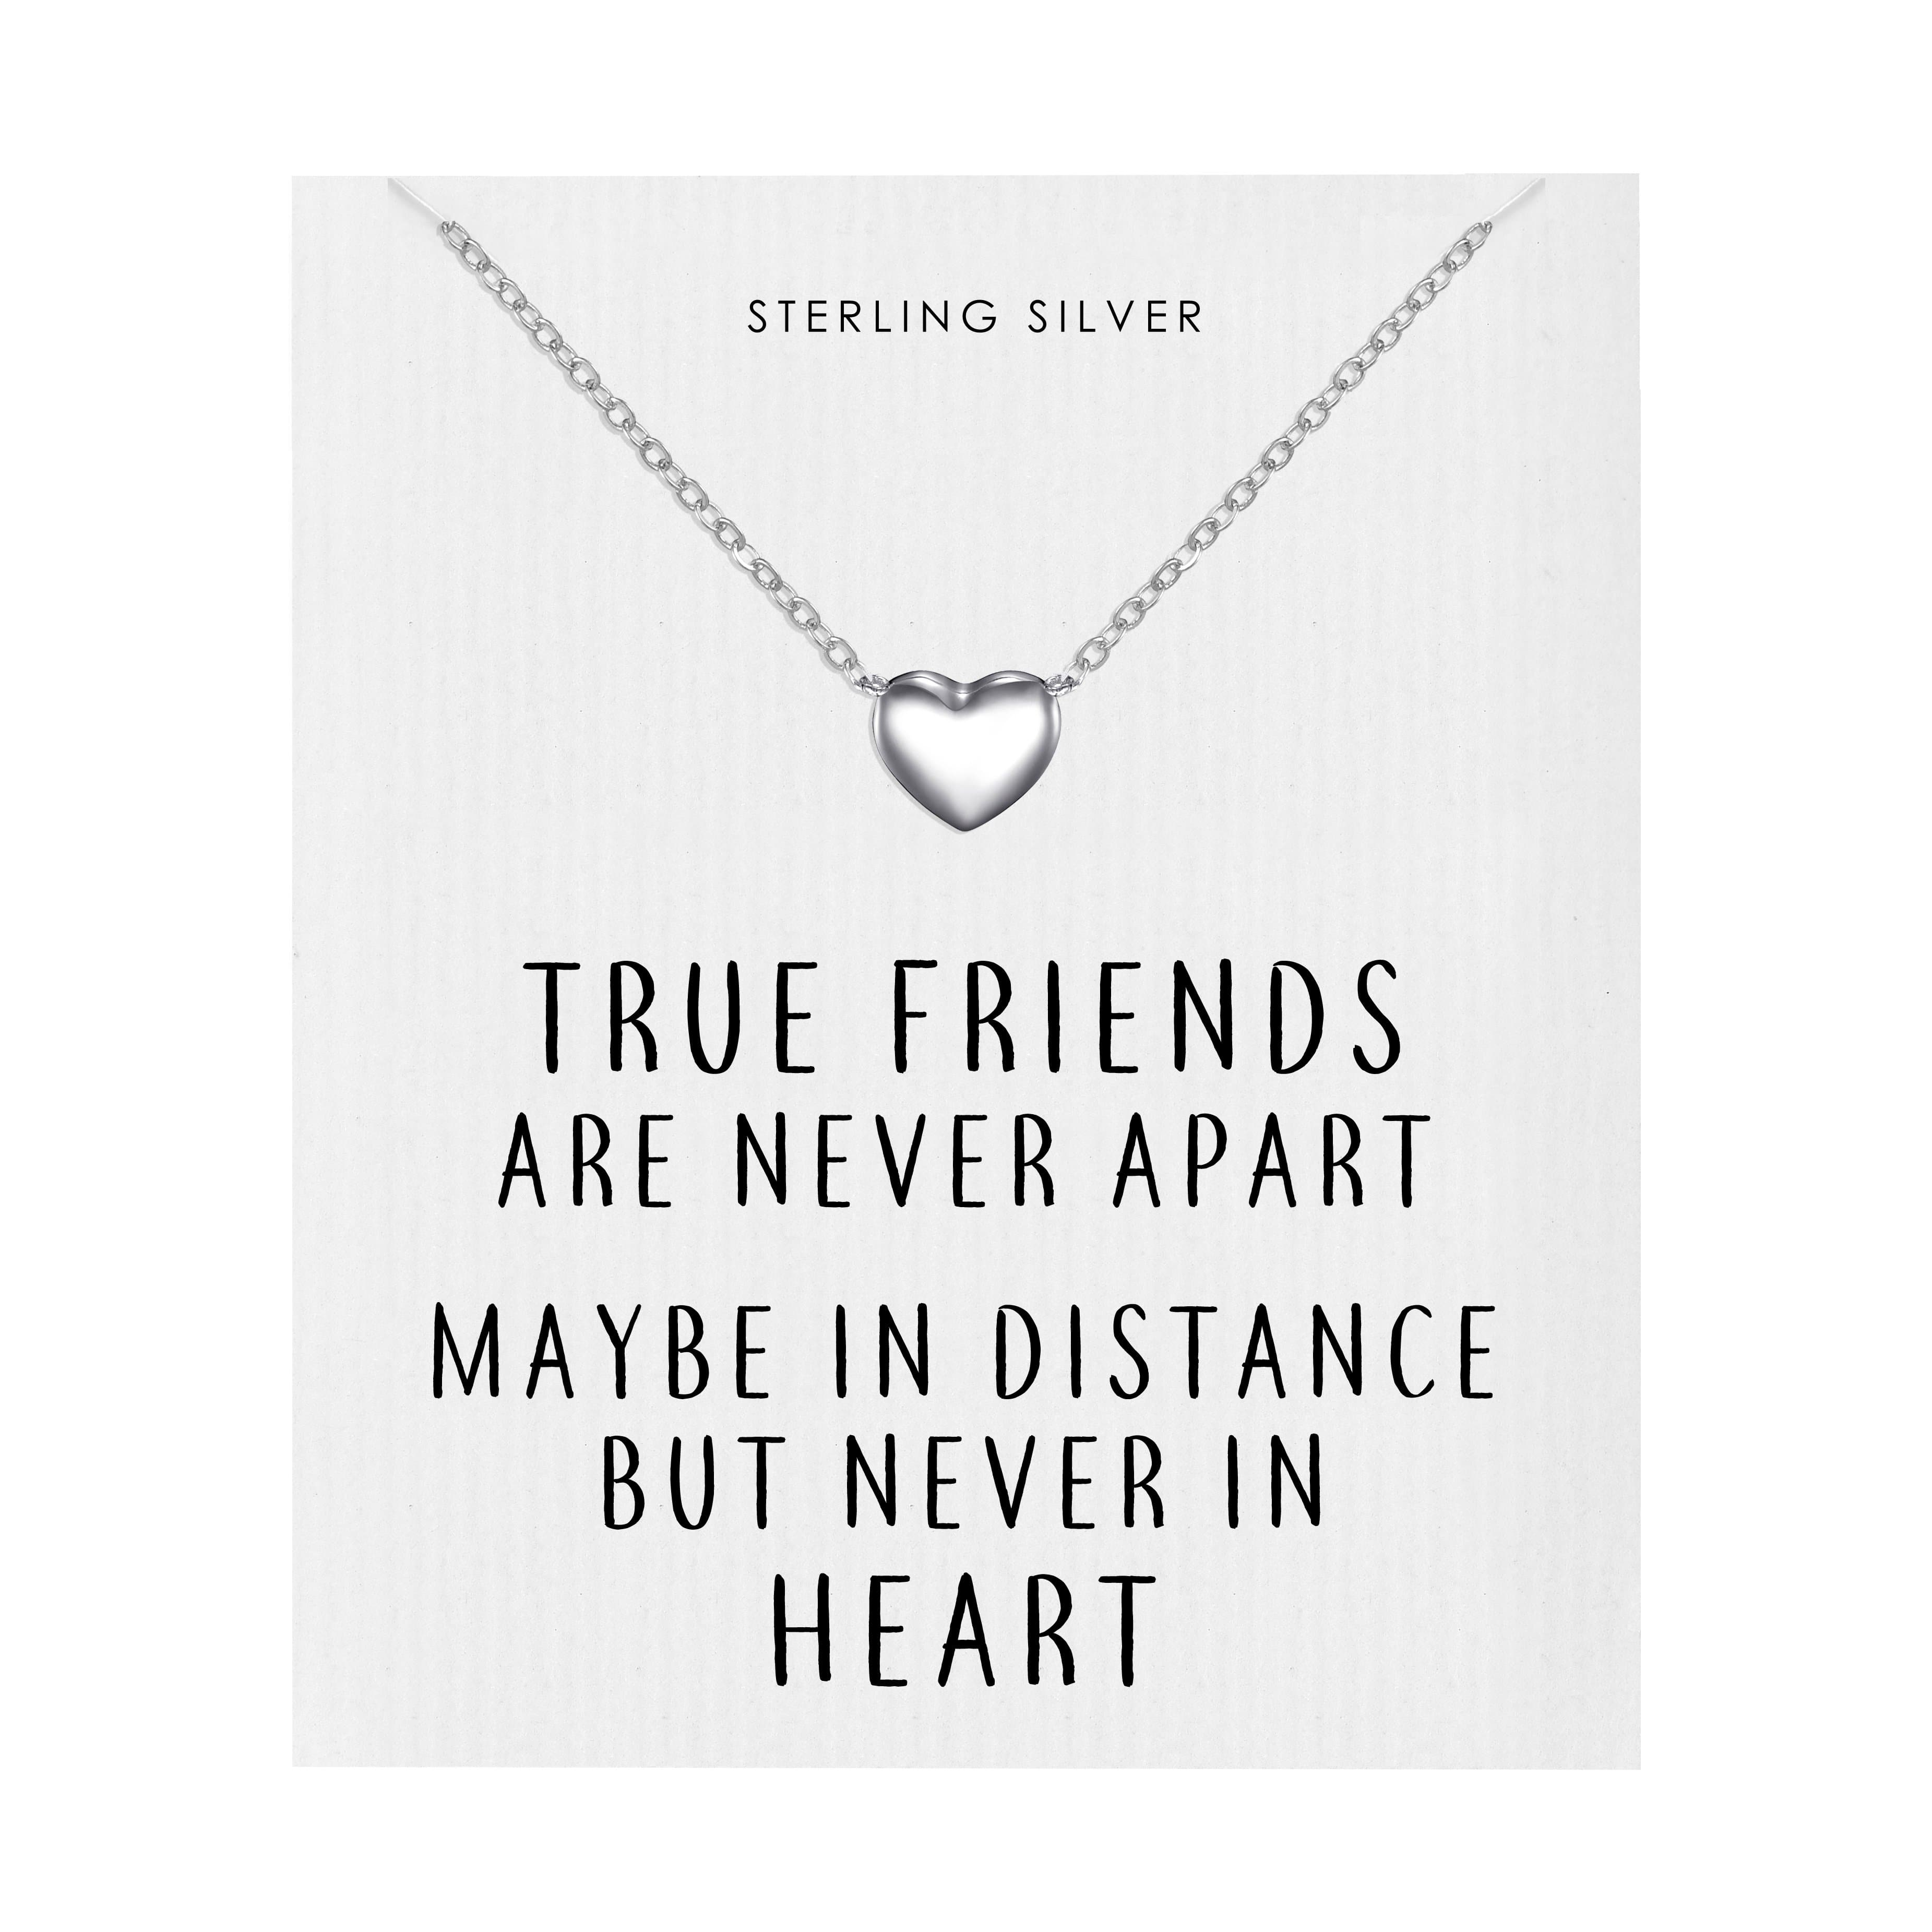 Sterling Silver Friendship Quote Heart Necklace by Philip Jones Jewellery